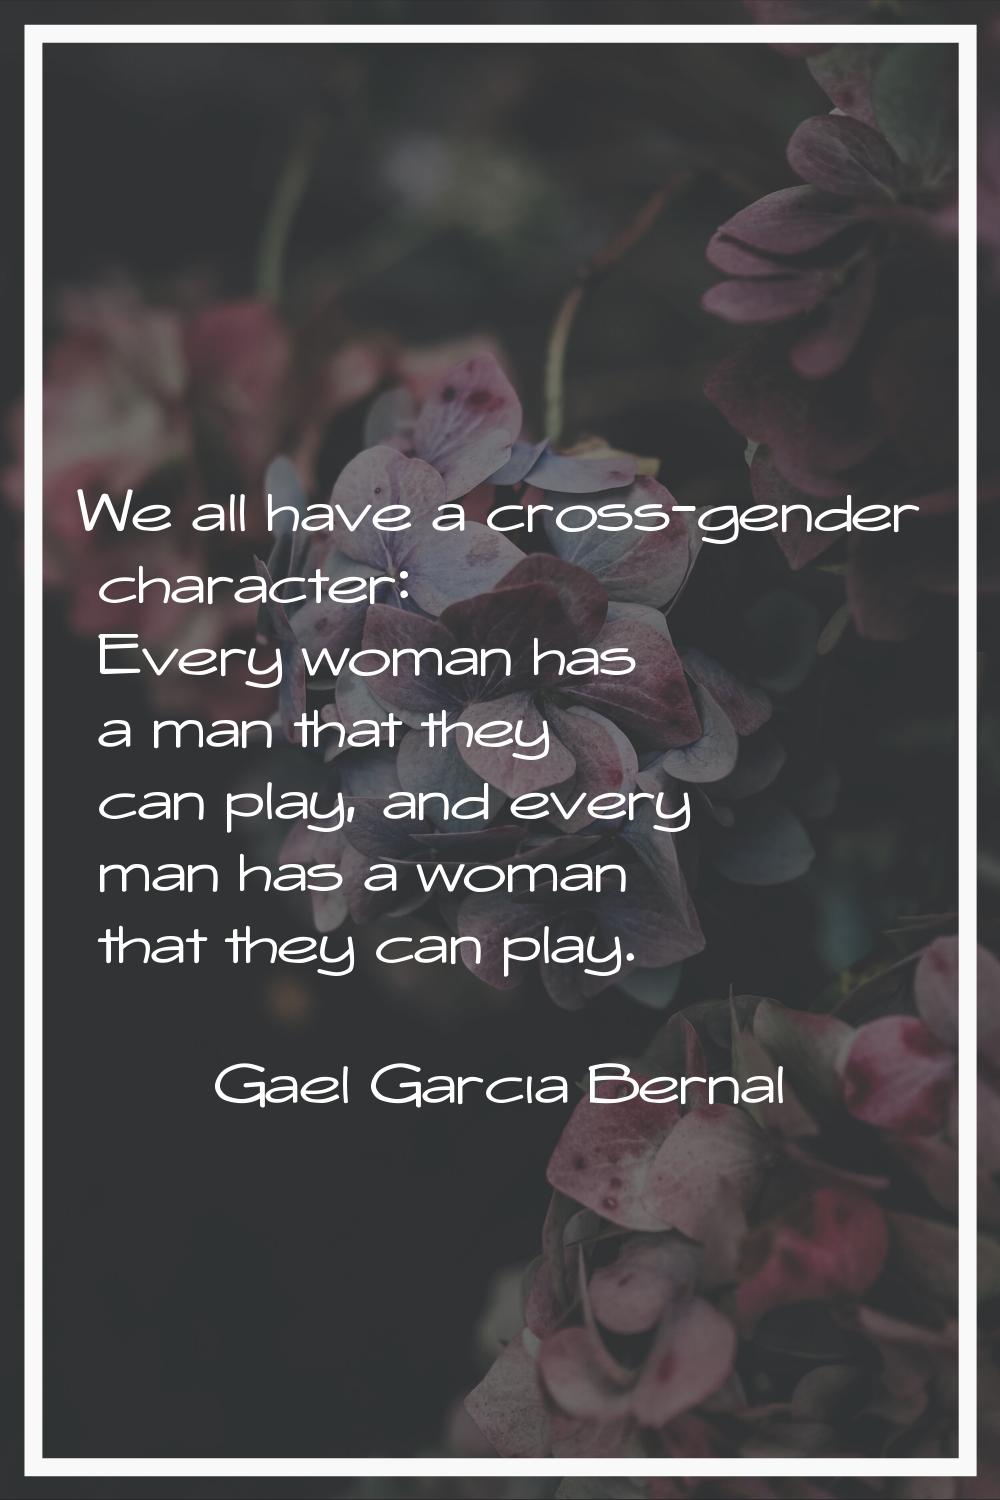 We all have a cross-gender character: Every woman has a man that they can play, and every man has a